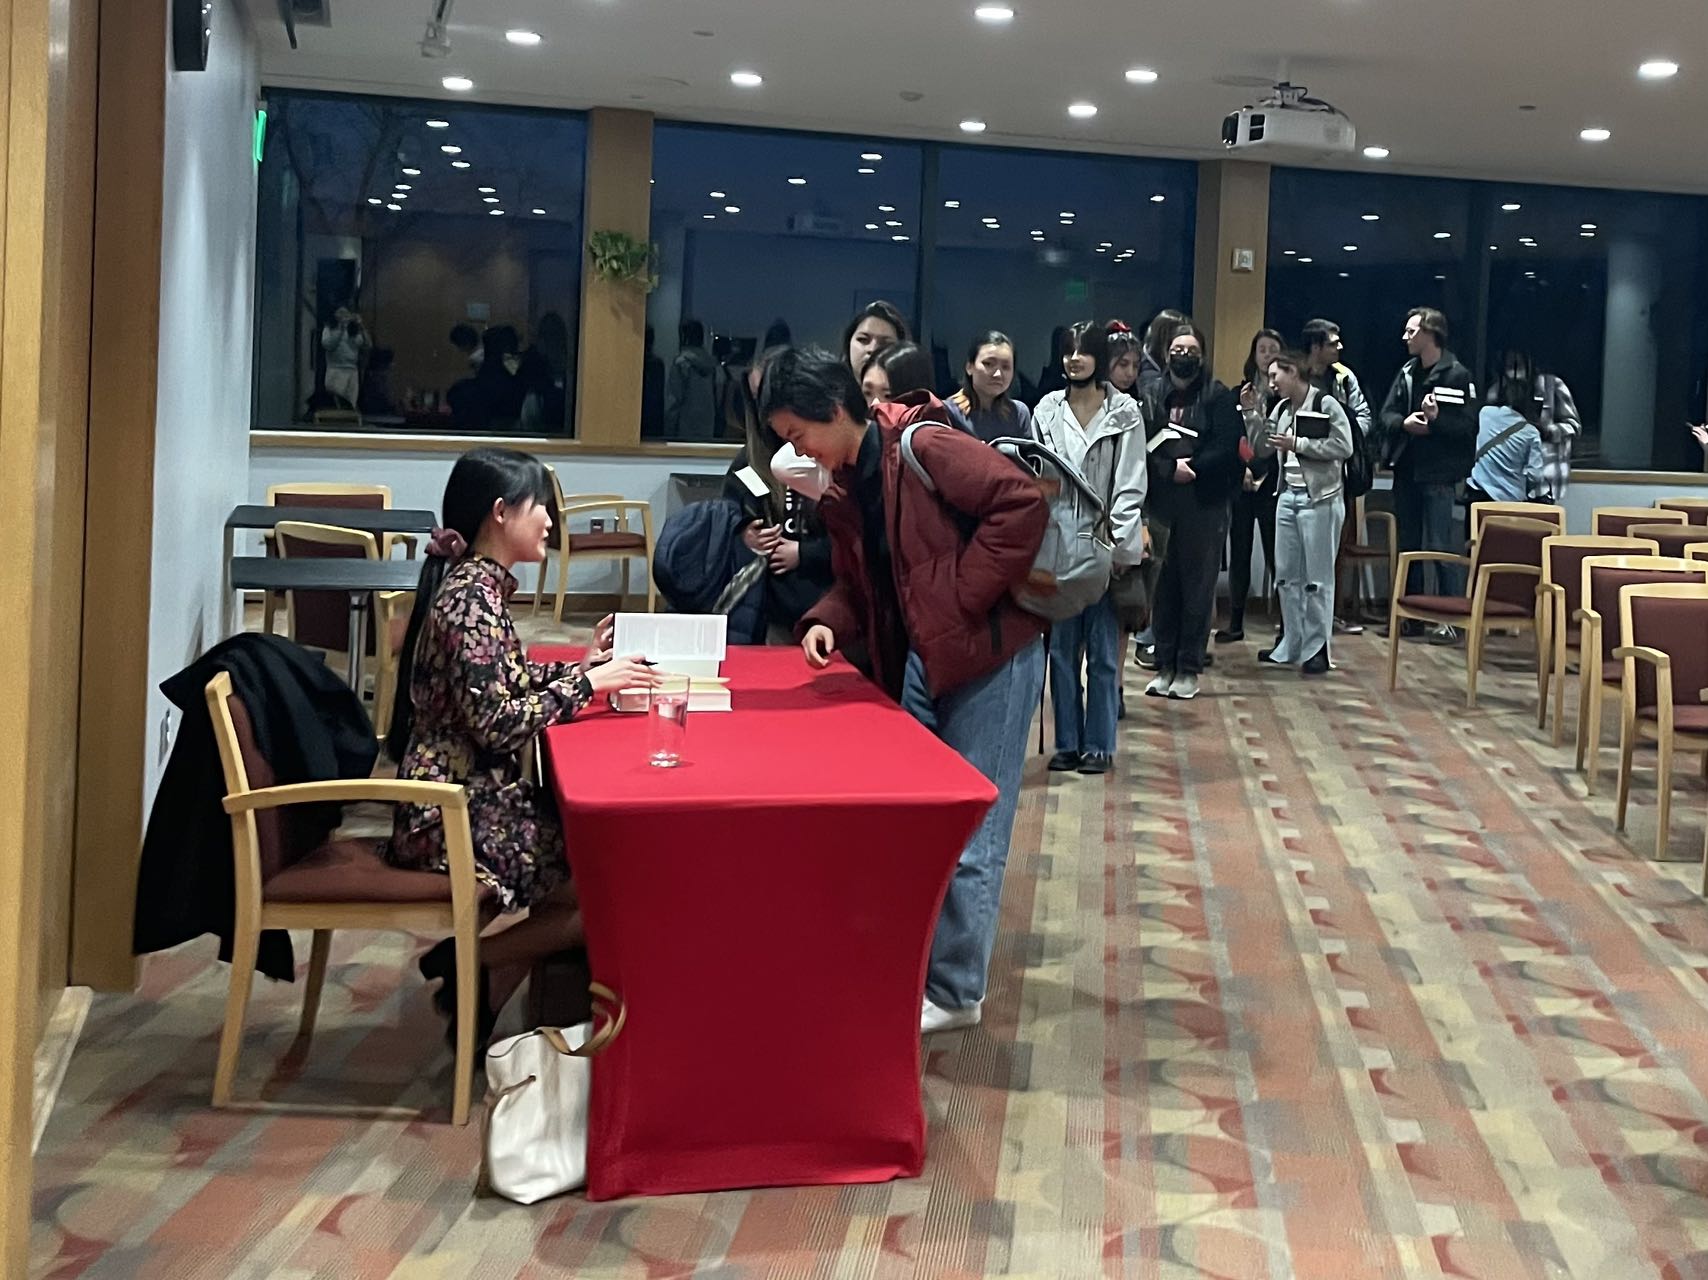 Rebecca F. Kuang Book Signing at the Daniel Family Commons